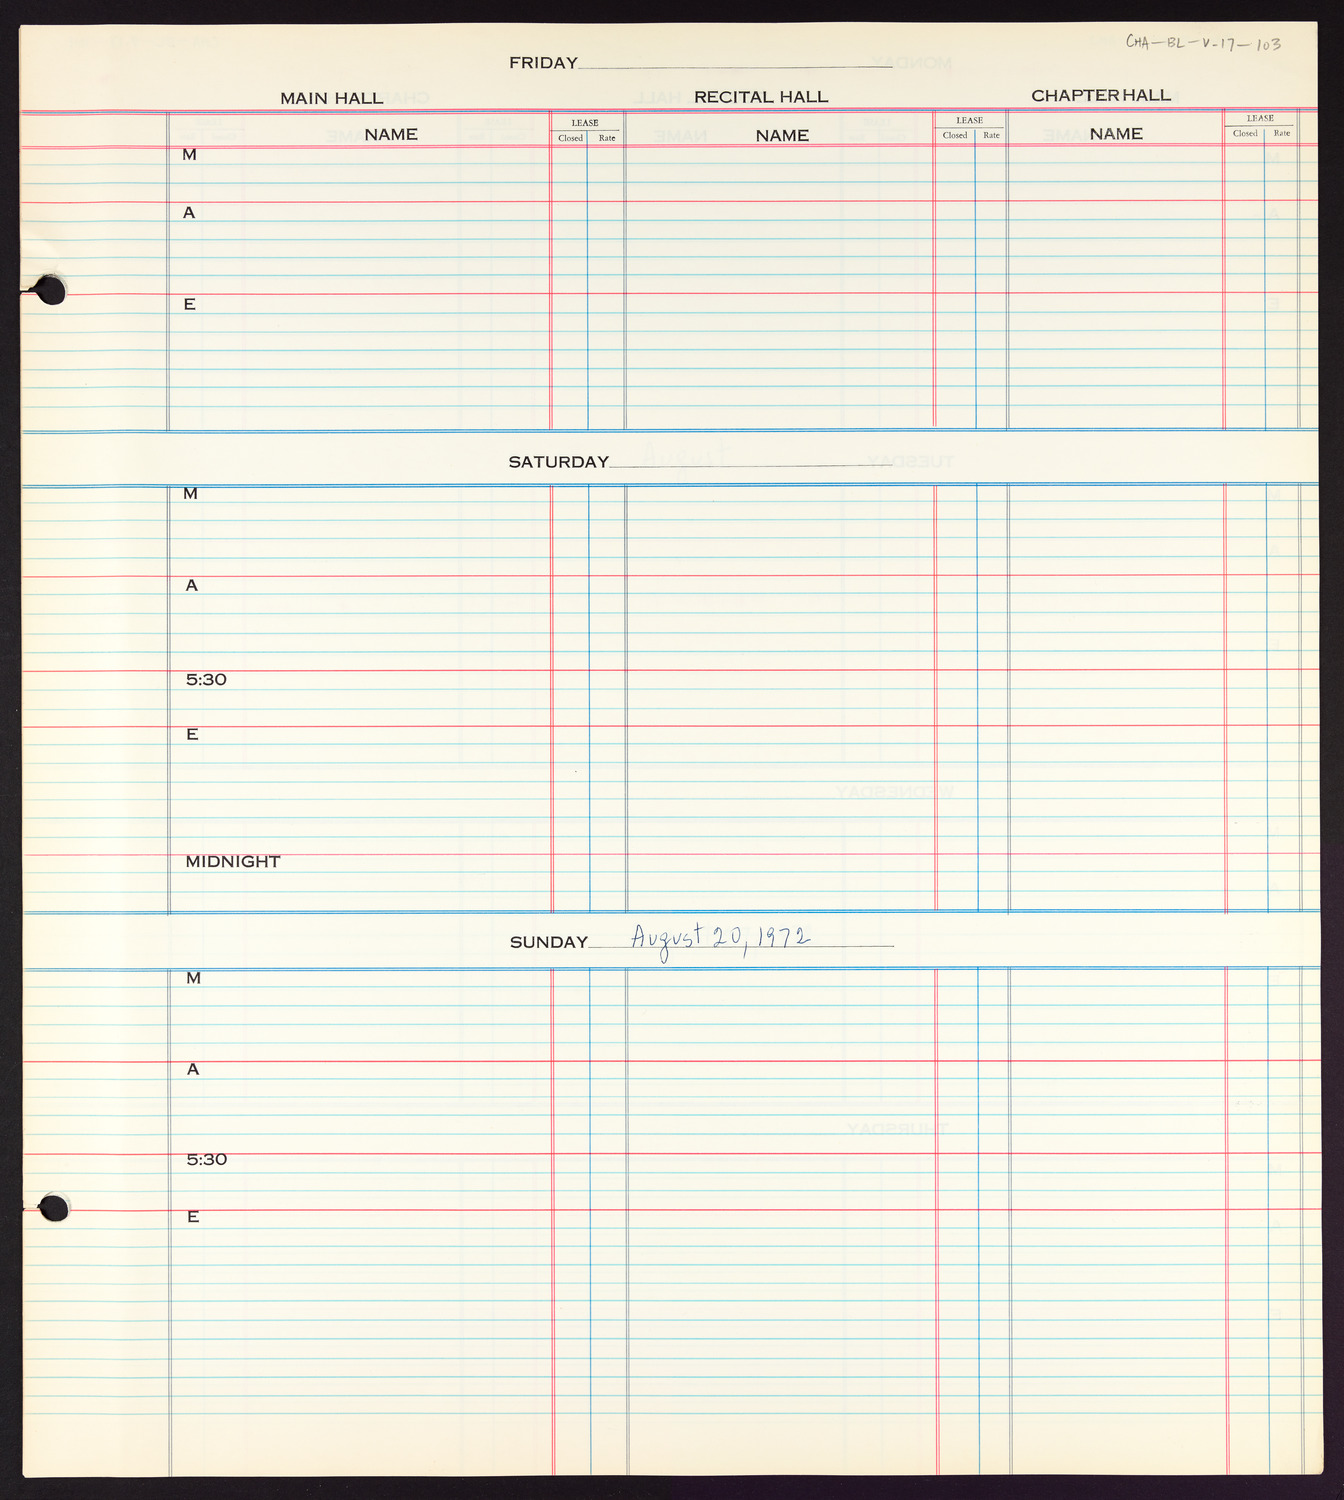 Carnegie Hall Booking Ledger, volume 17, page 103